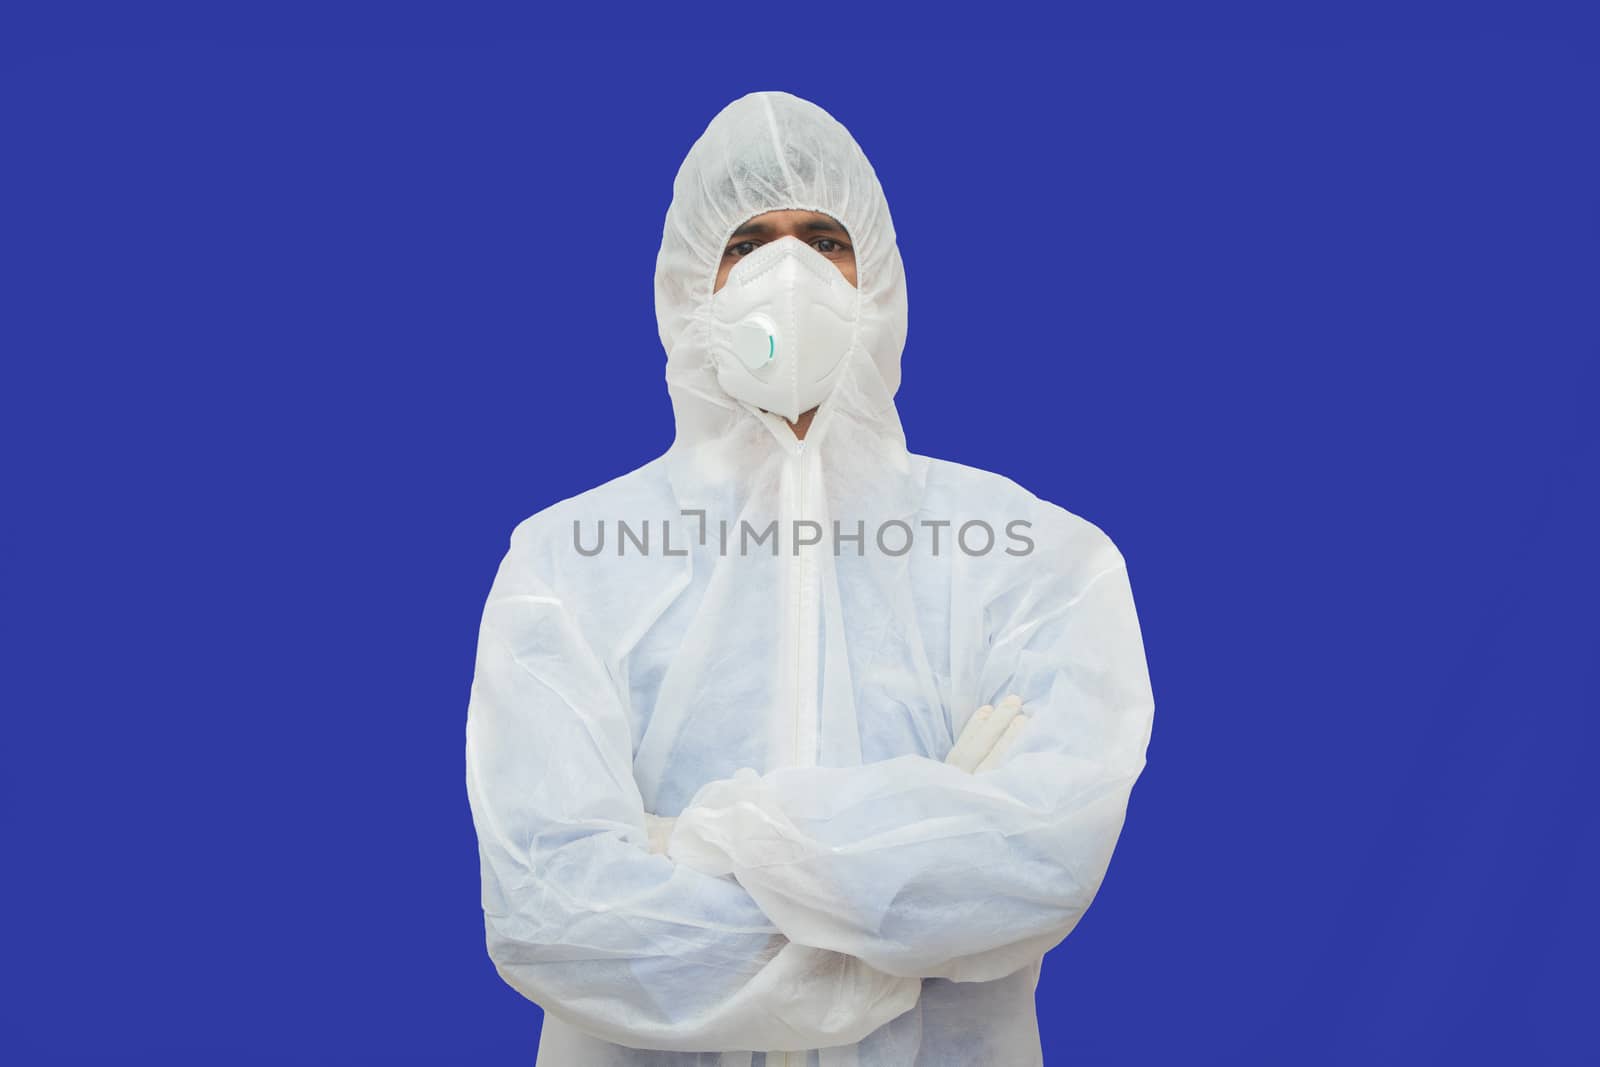 Confident epidemiologist in hazmat suit with medical face mask - Concept to fight covid-19 or coronavirus outbreak by controlling virus spread